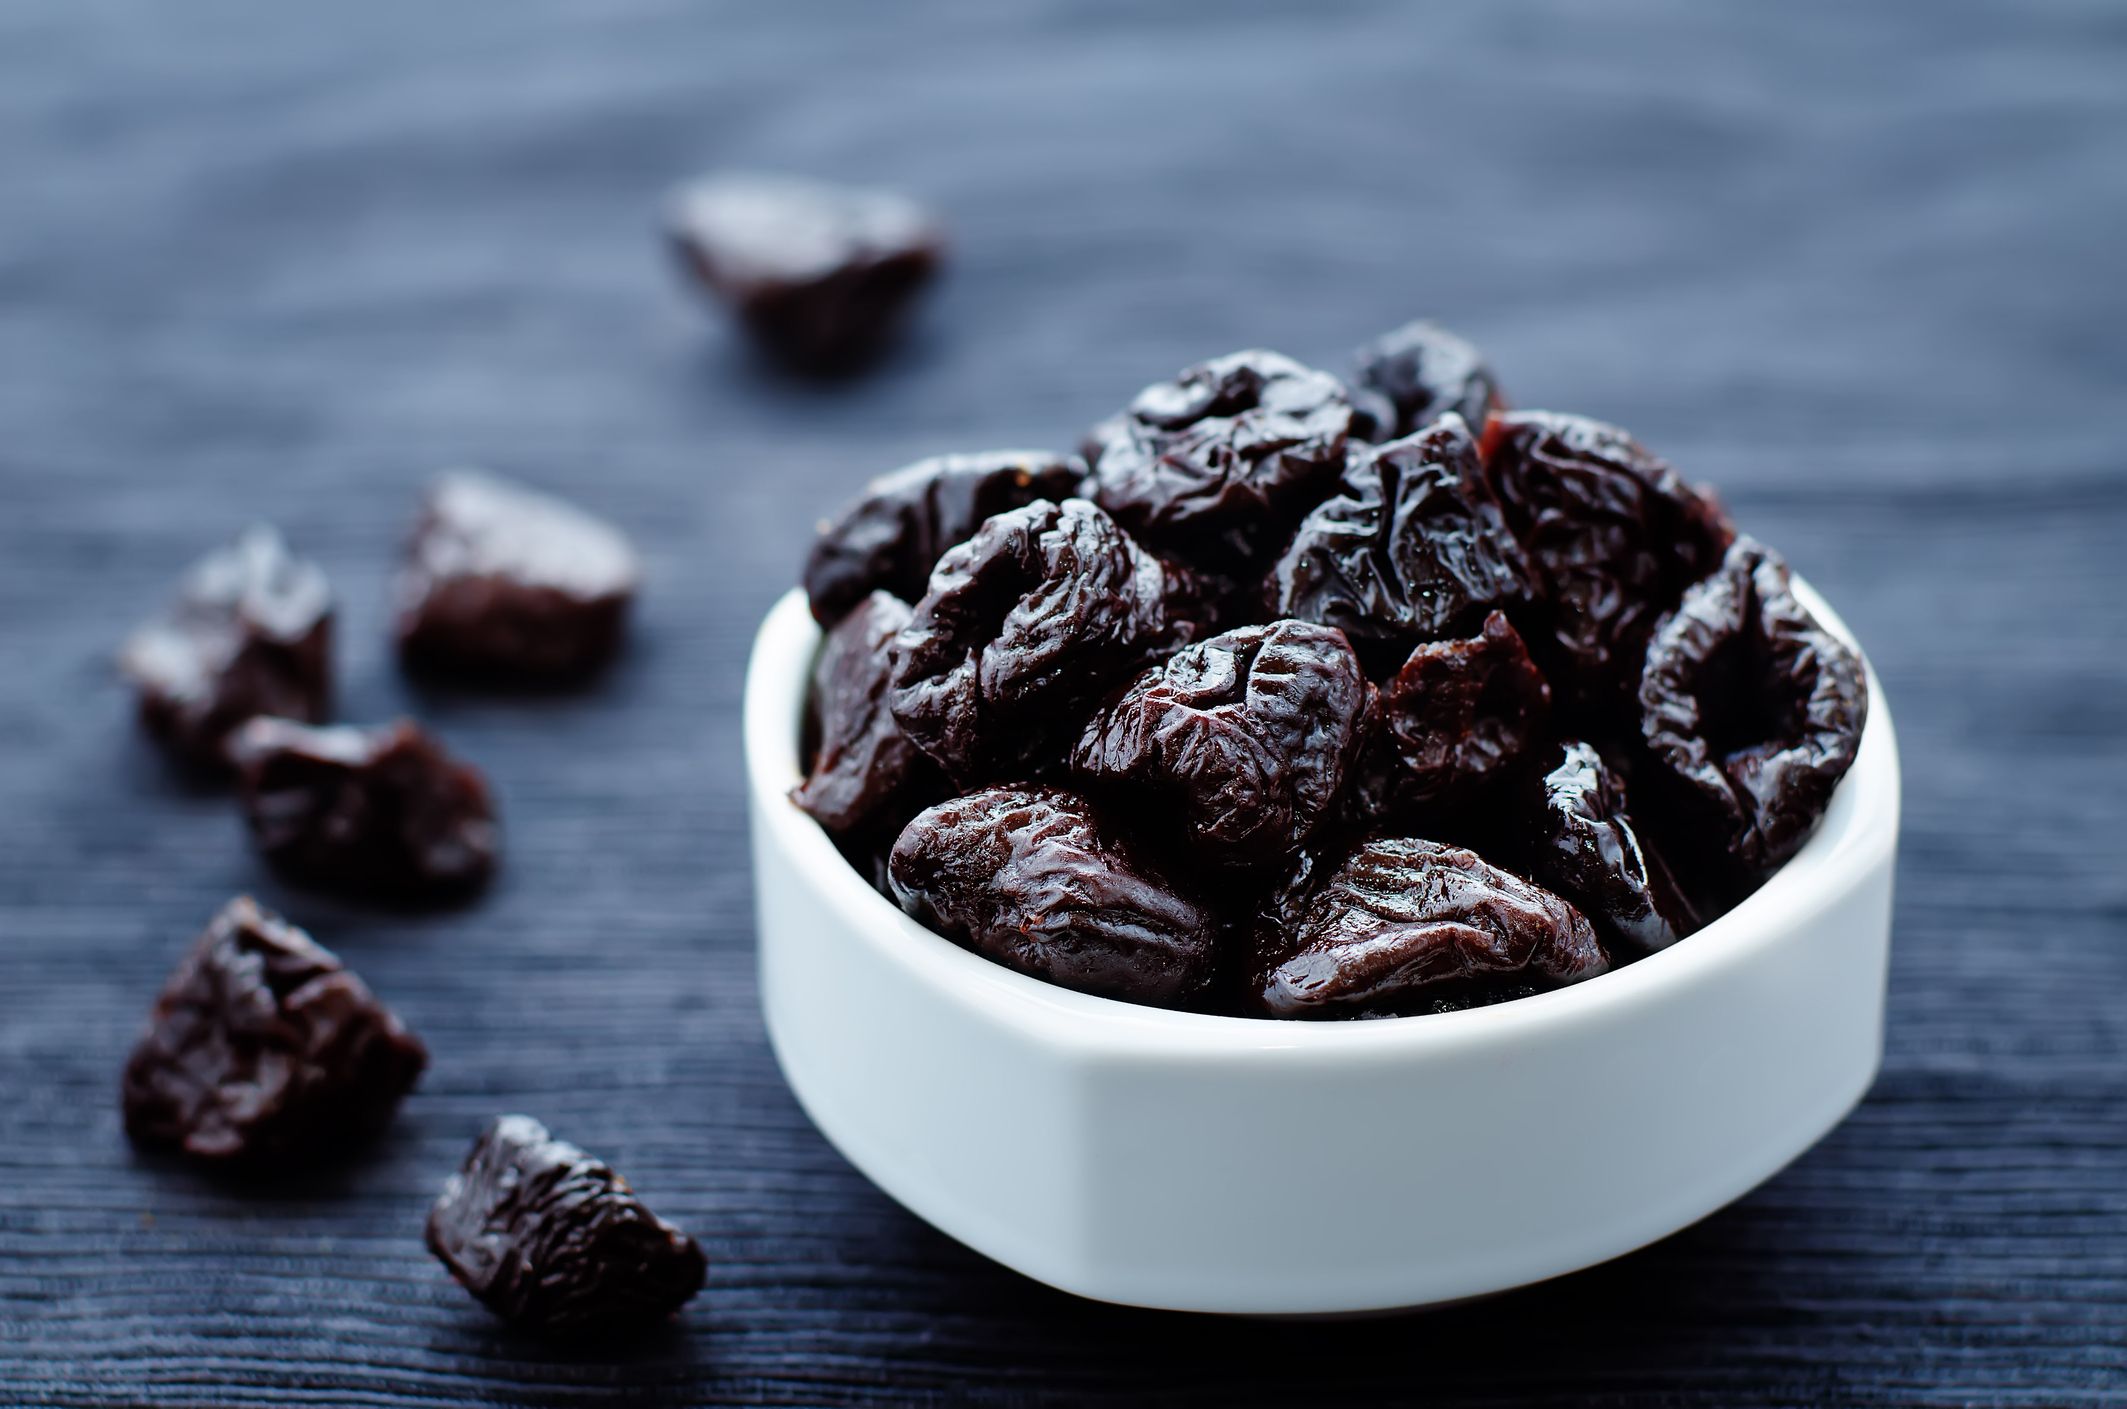 Are Prunes Healthy? - Benefits and Nutrition of Prunes and Prune Juice